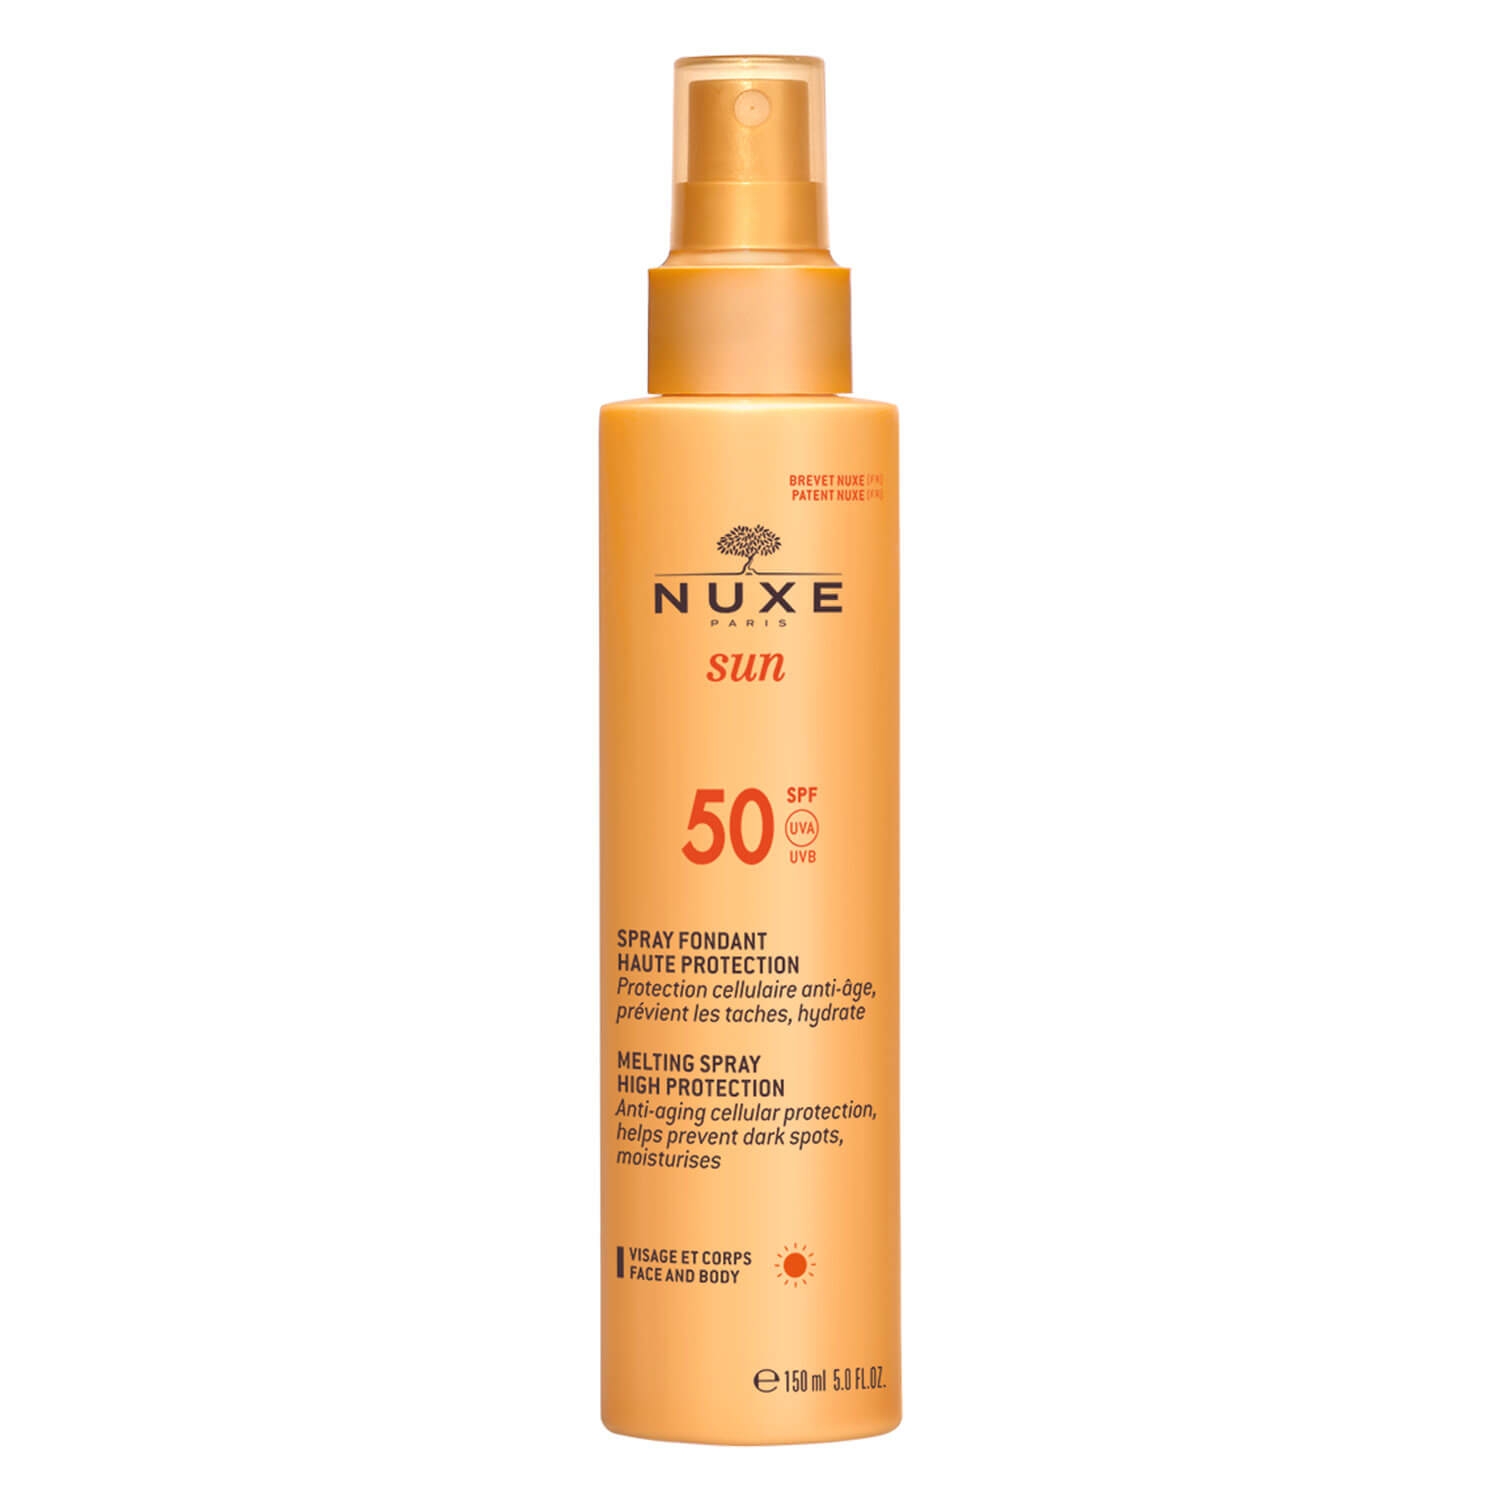 Product image from Nuxe Sun - Spray Fondant Haute Protection SPF50